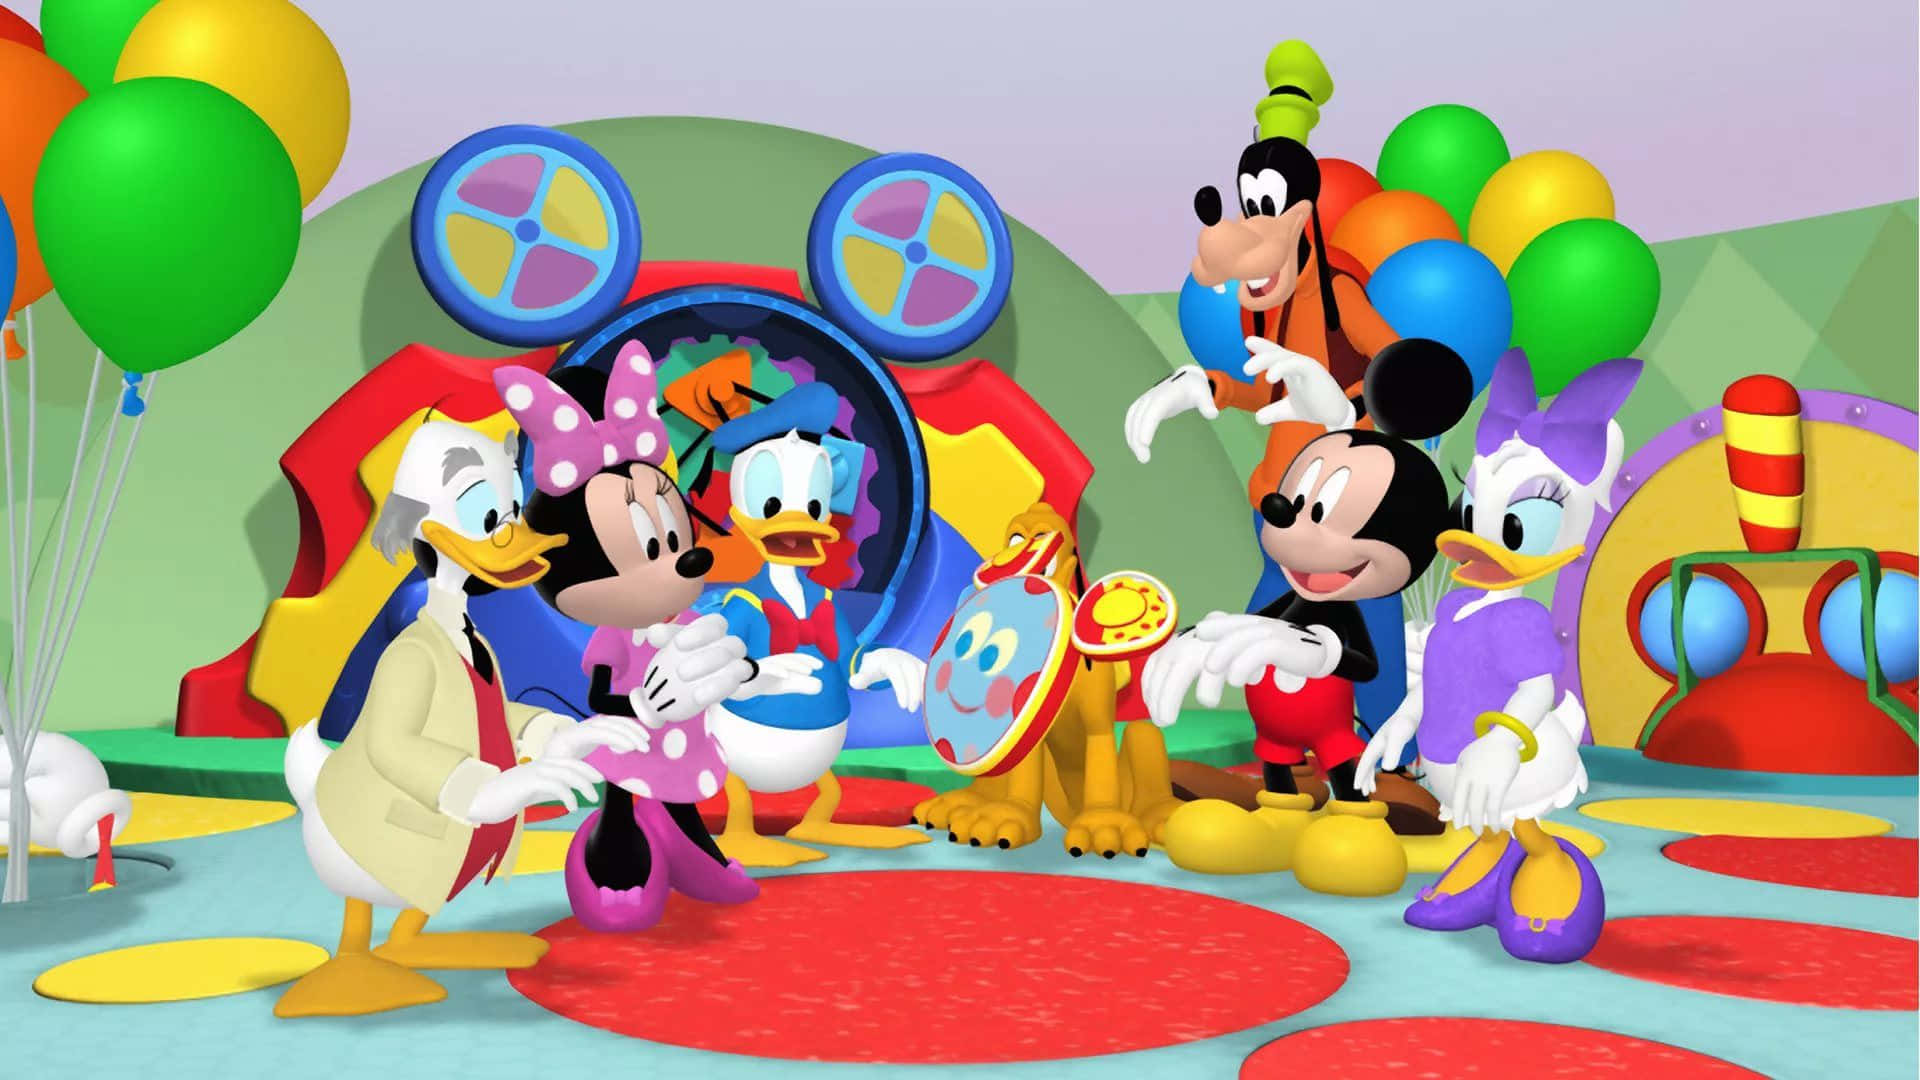 "The Whole Gang From Mickey Mouse Clubhouse"